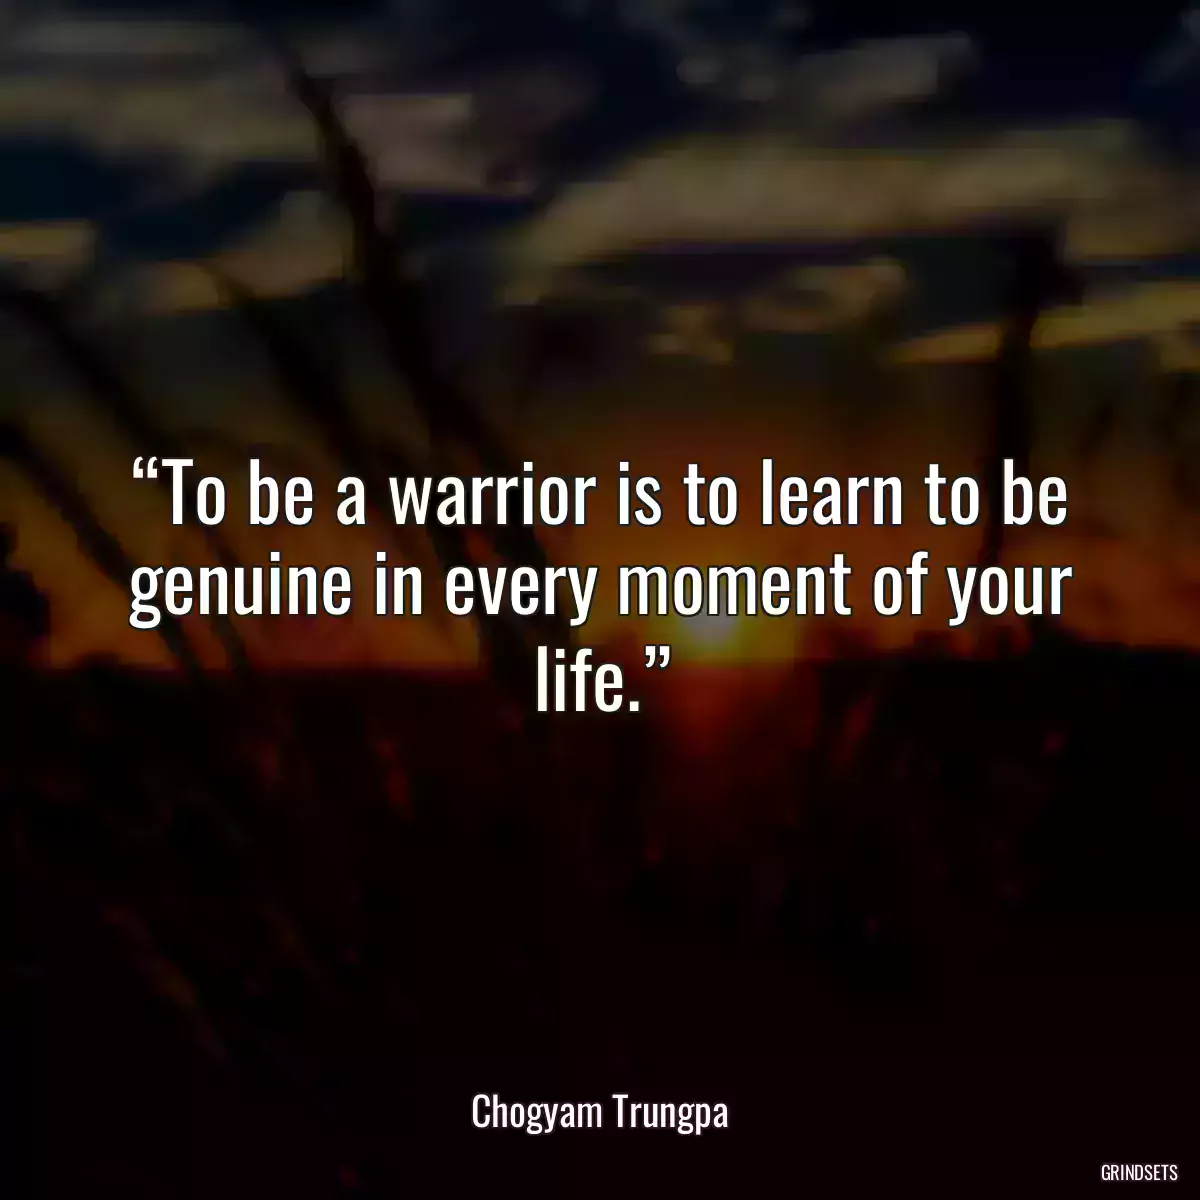 “To be a warrior is to learn to be genuine in every moment of your life.”